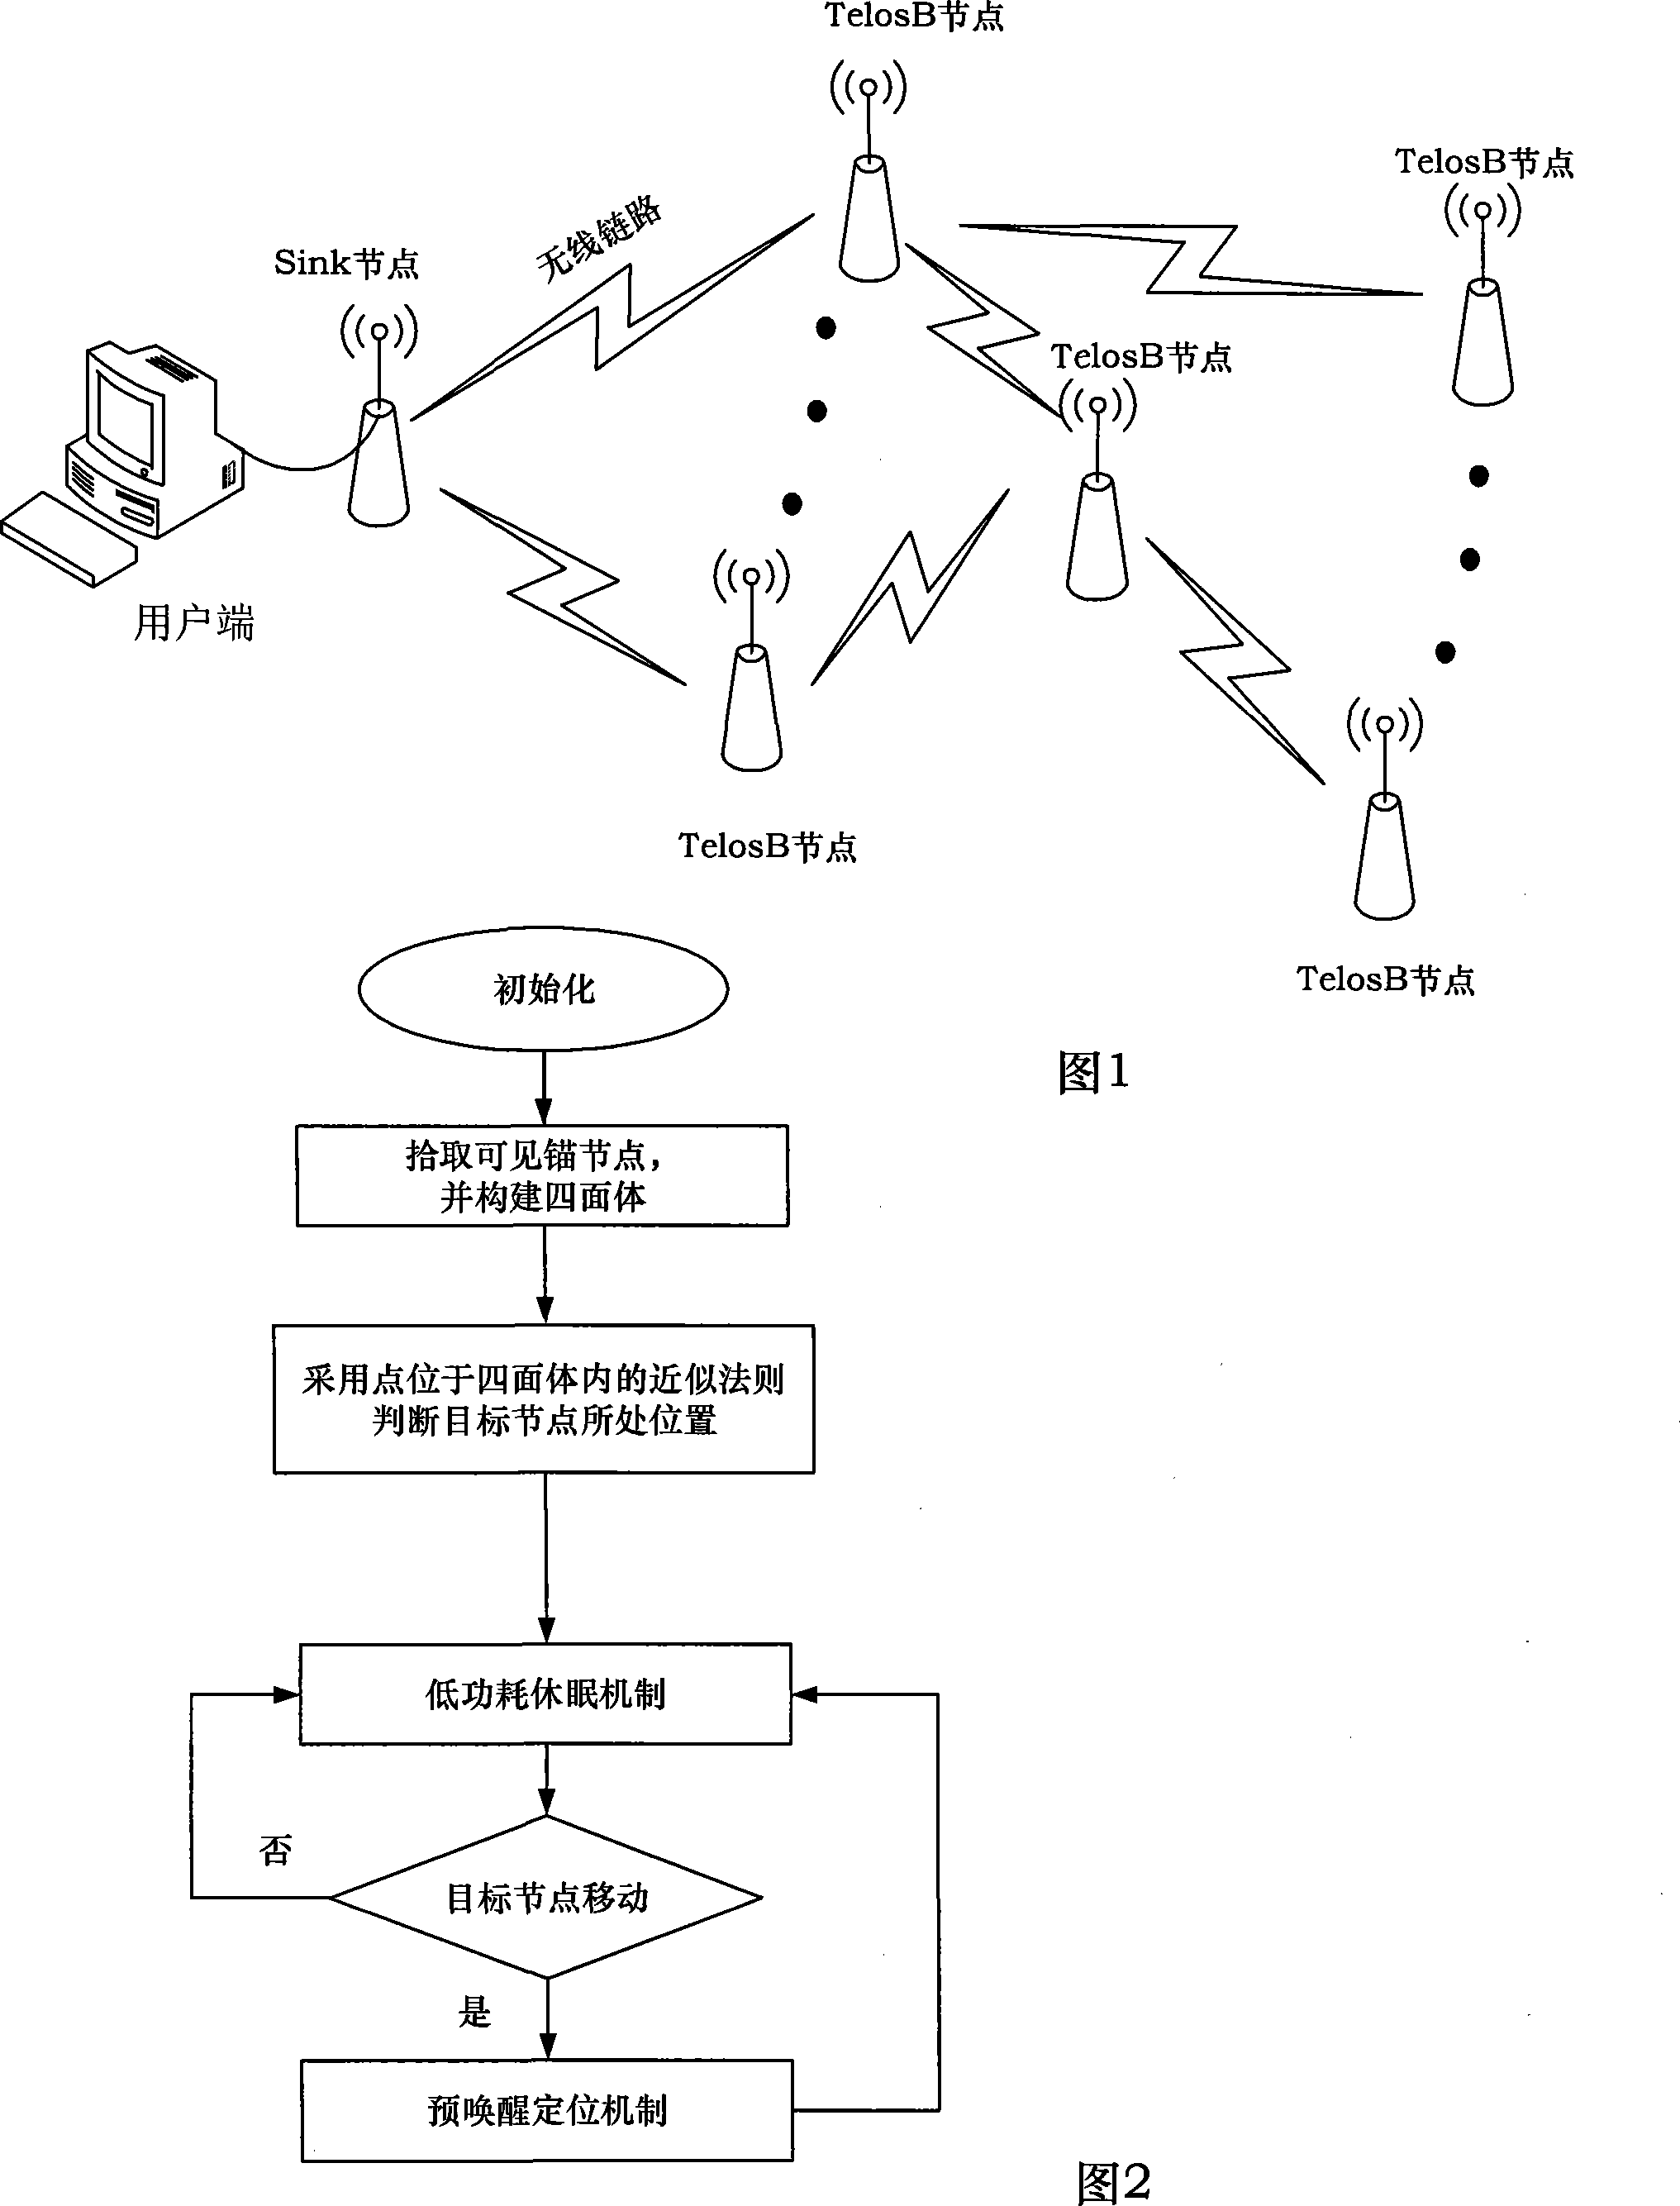 Wireless sensor network positioning system facing to three dimensional space